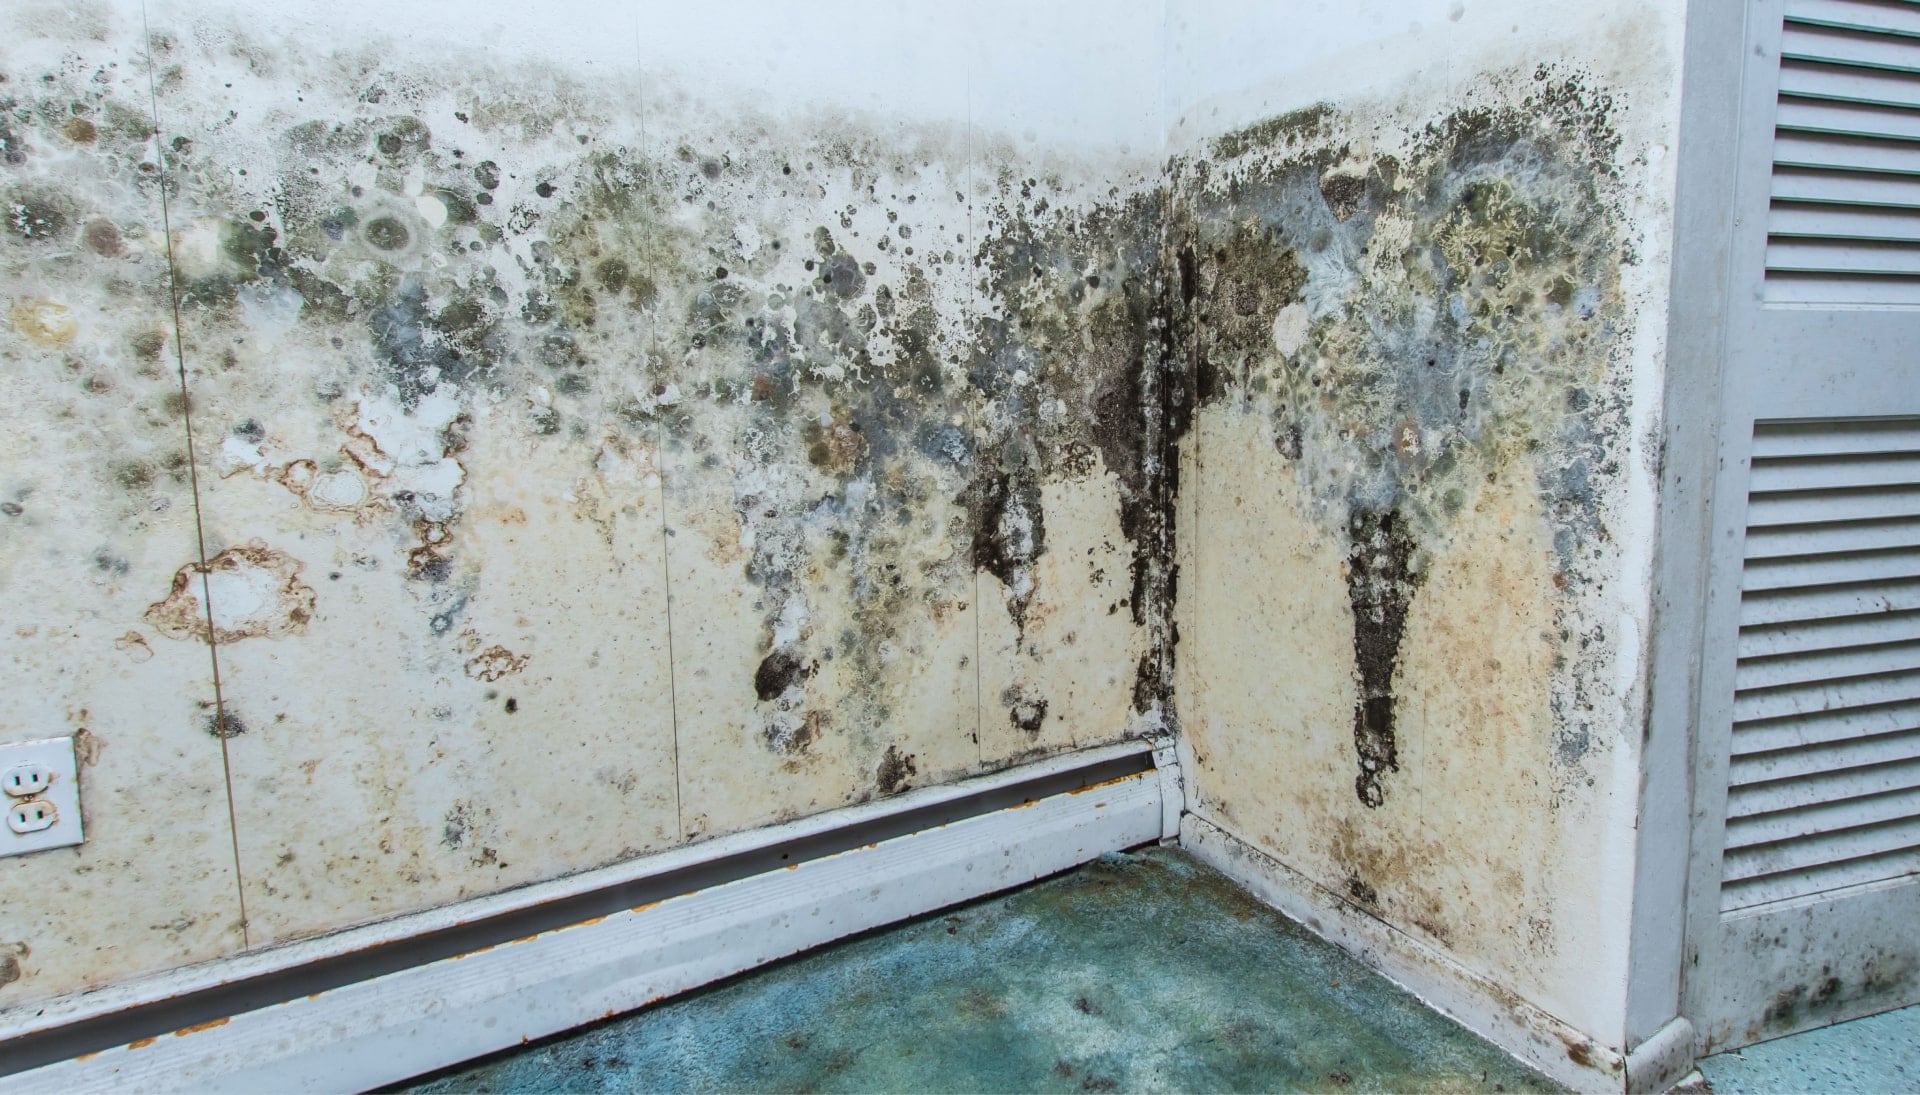 Mold-Damager-Odor-Control in Houston